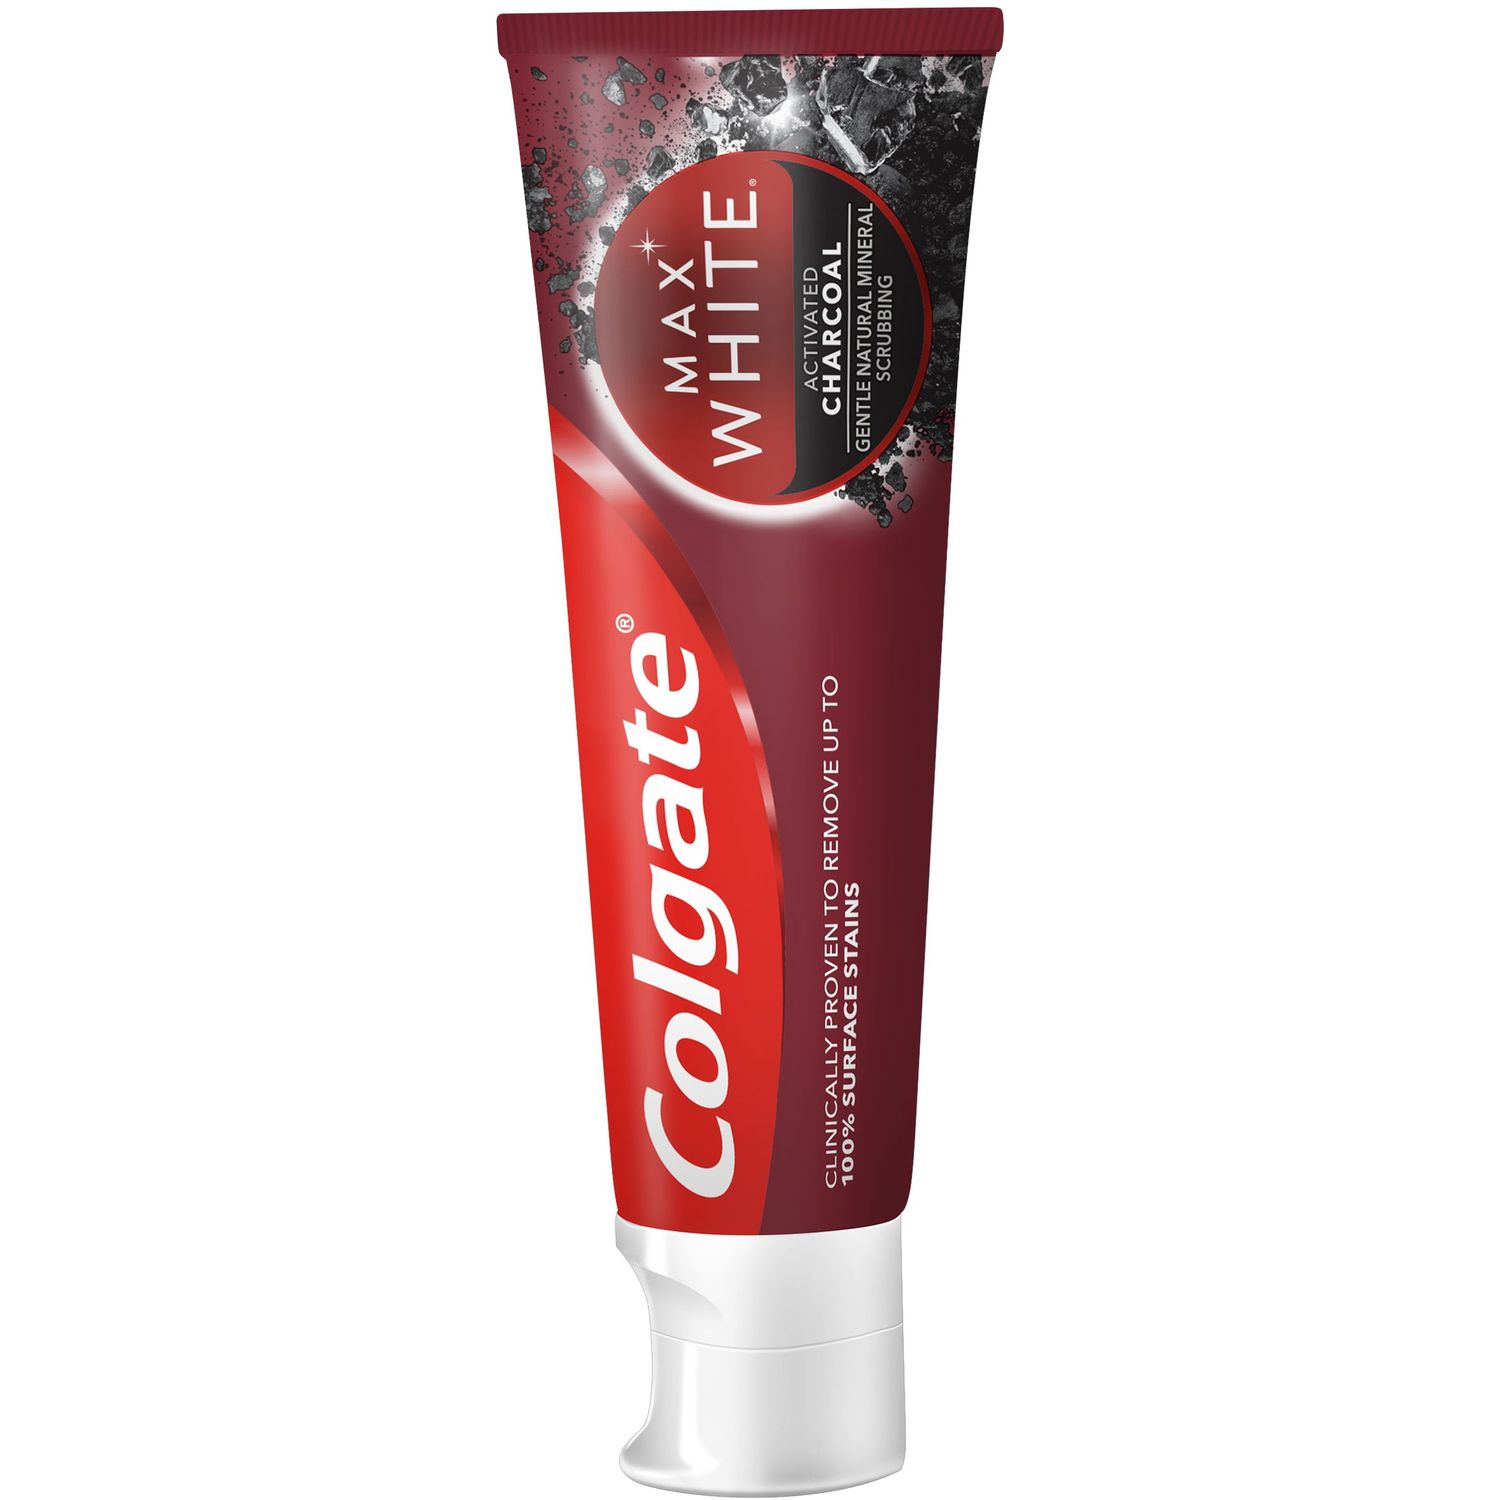 Зубна паста Colgate Max White Activated Charcoal 75 мл - фото 3